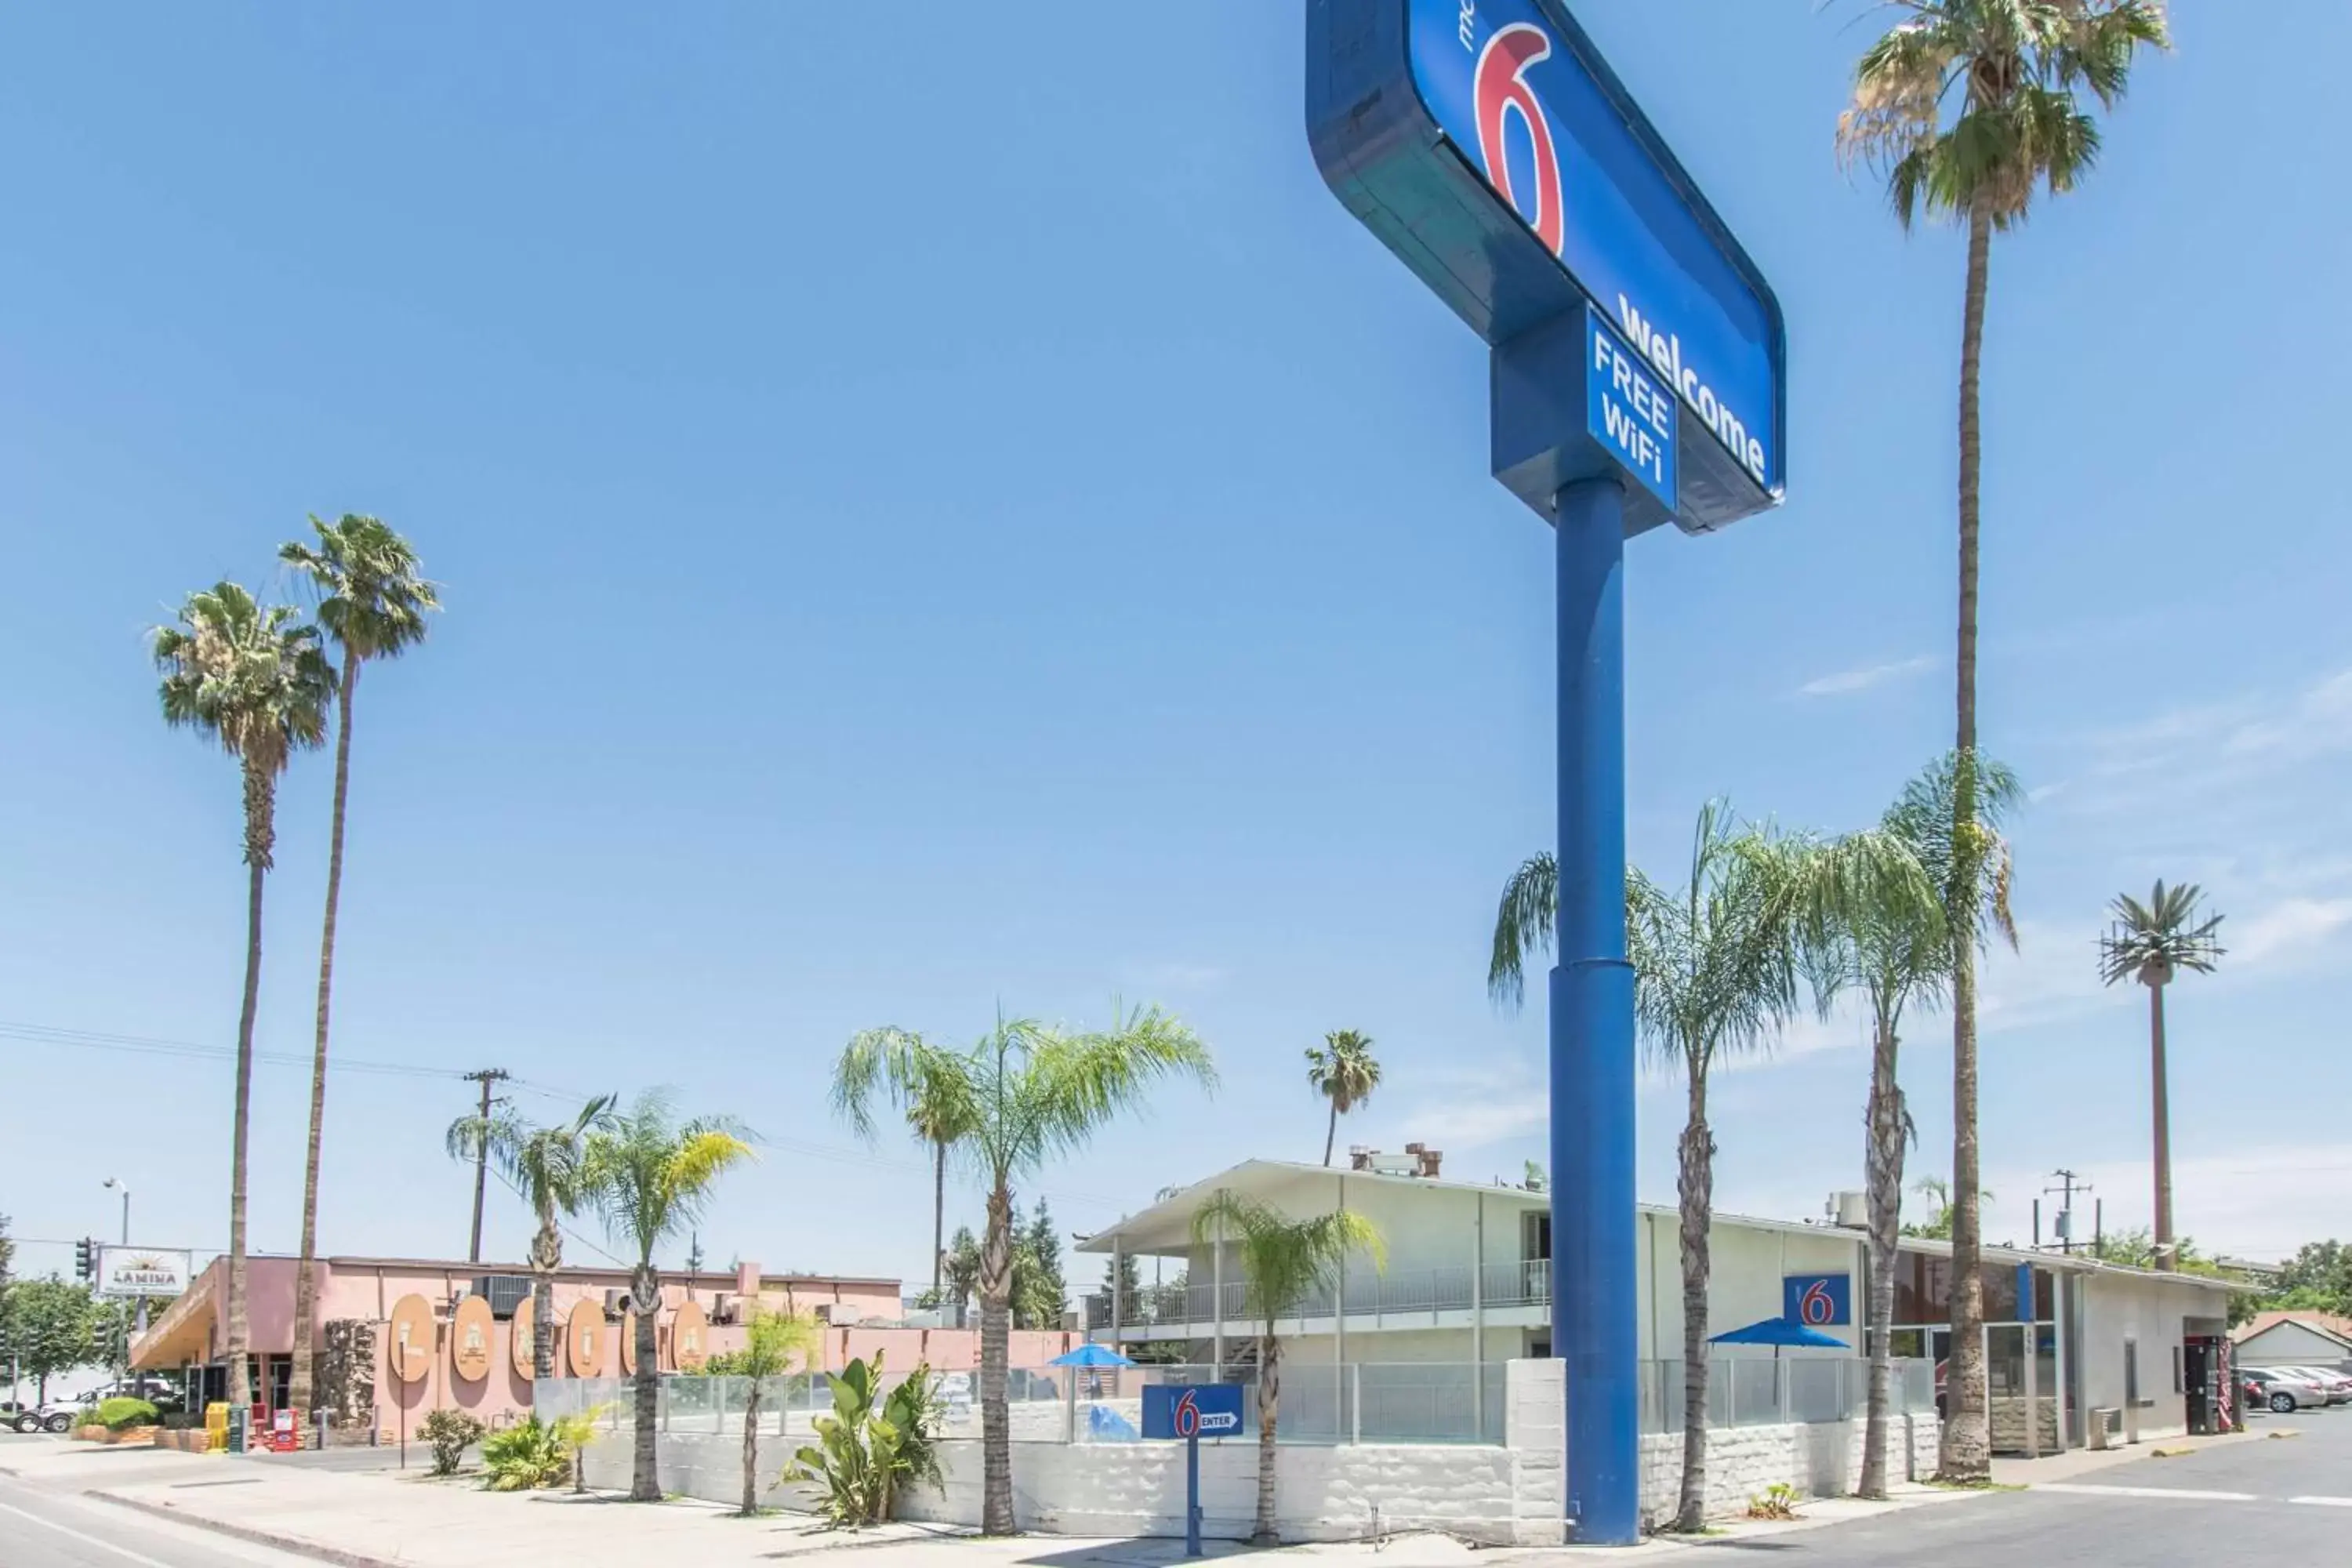 Property building in Motel 6 Bakersfield, CA - Central